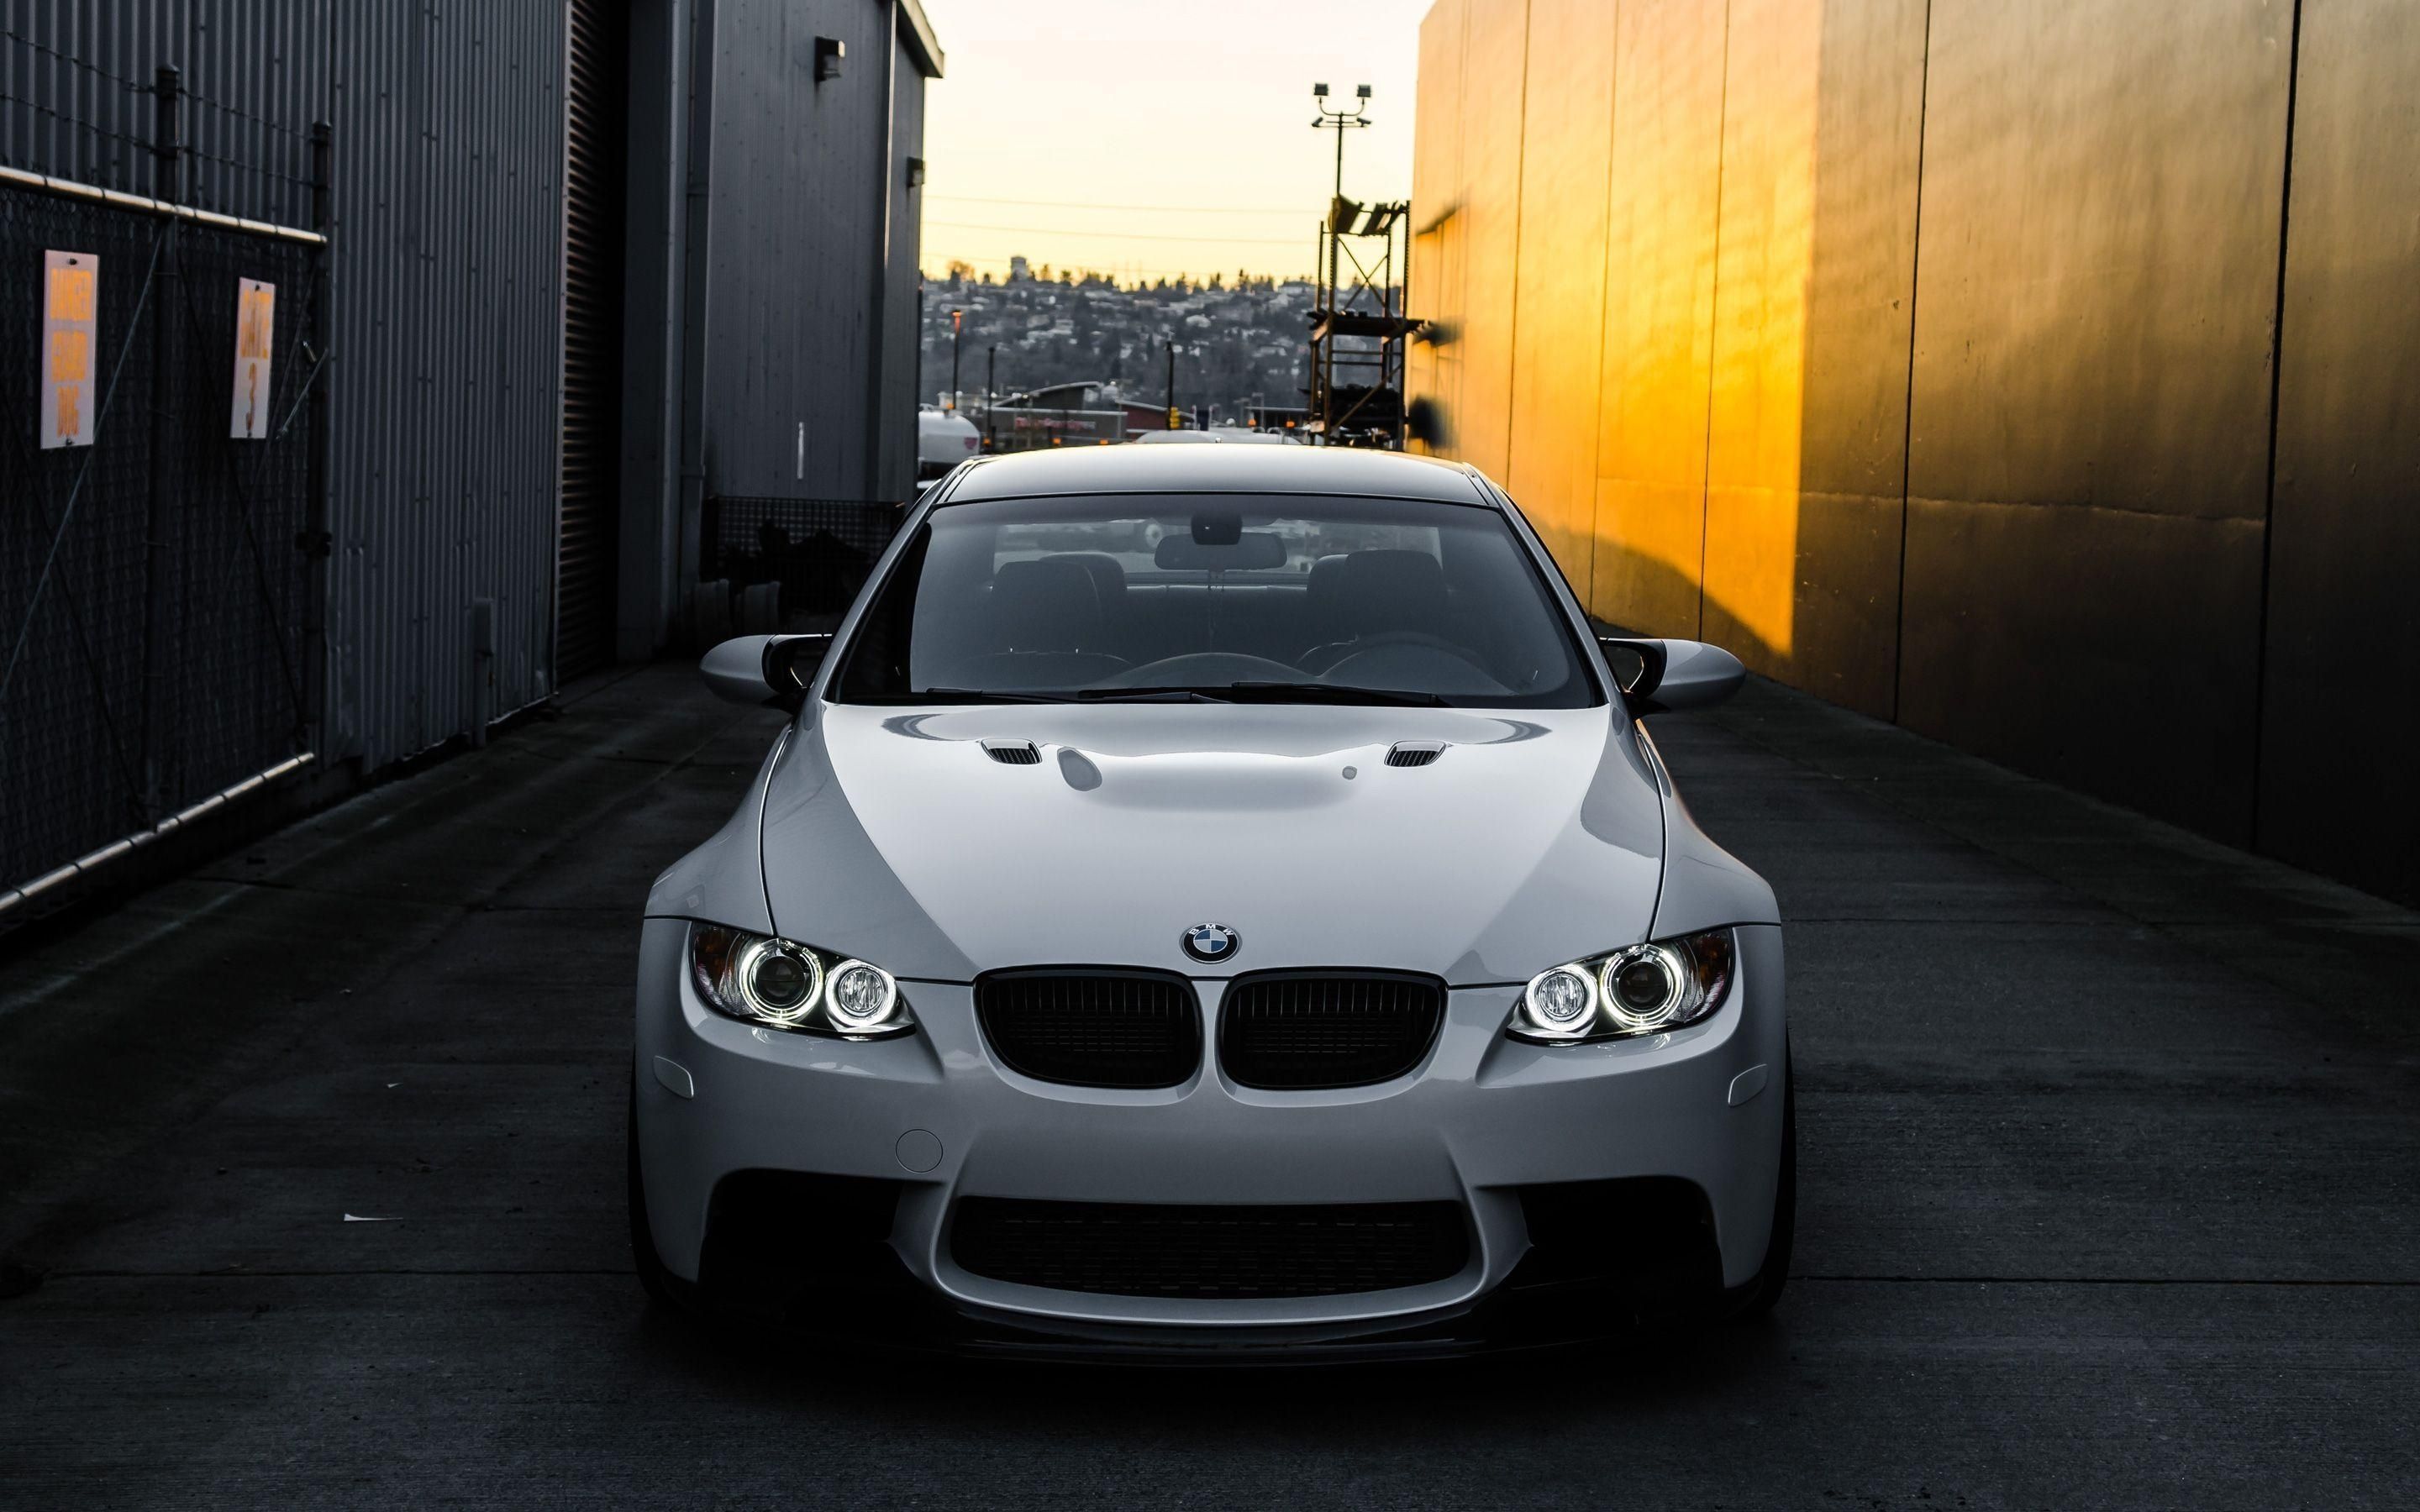 Free Download 10 Latest Bmw M3 Wallpaper Hd Full Hd 1080p For Pc Background 2880x1800 For Your Desktop Mobile Tablet Explore 20 Bmw Backgrounds Bmw Wallpaper Bmw Wallpapers Bmw E36 Wallpaper